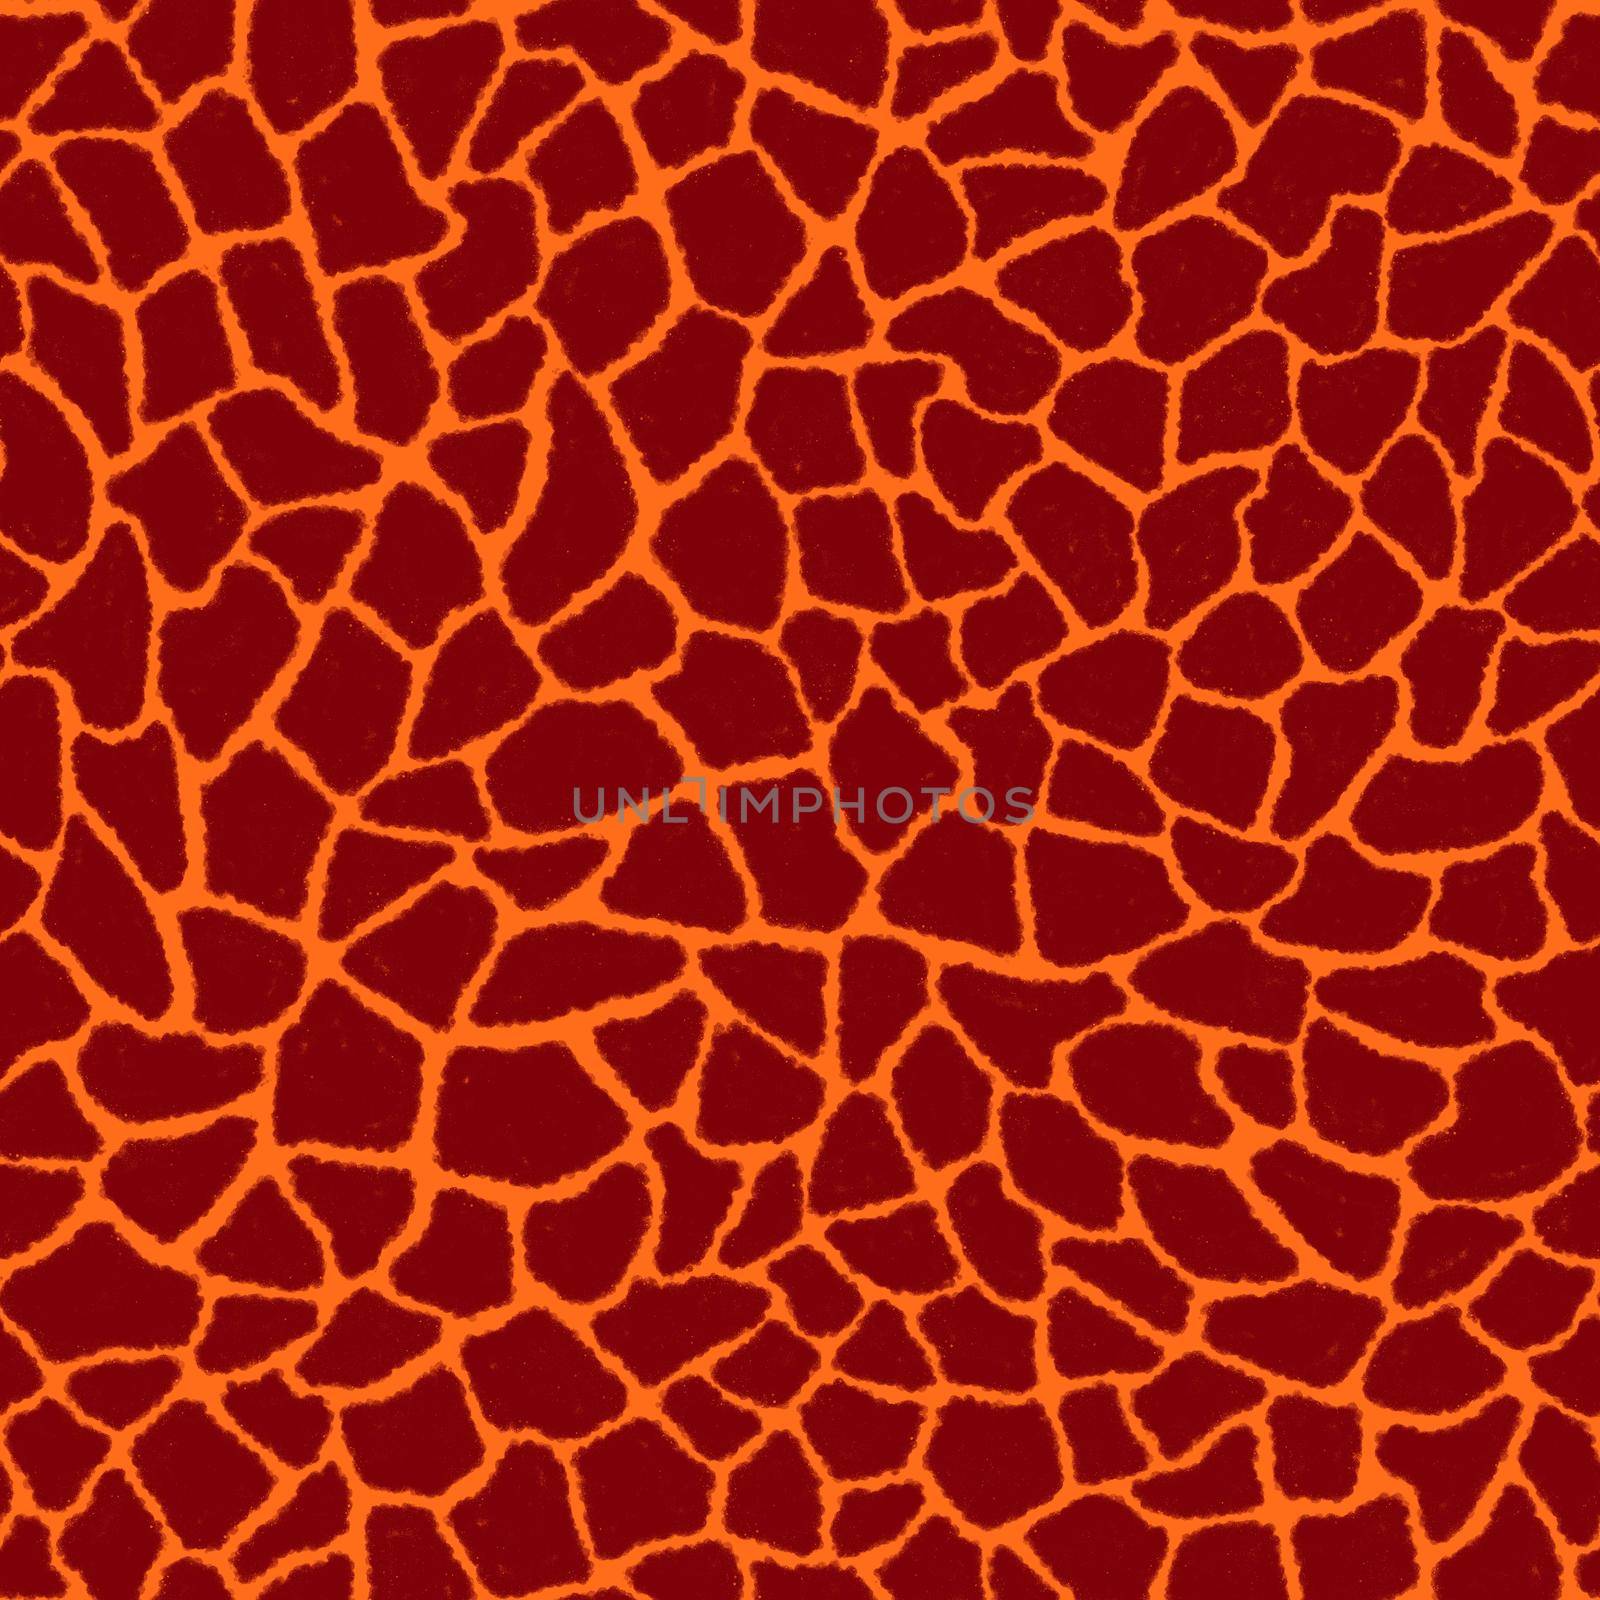 Giraffe skin color seamless pattern with fashion animal print for continuous replicate. Chaotic mosaic burgundy pieces on orange background. Wrapping paper, funny textile fabric print,design,decor.